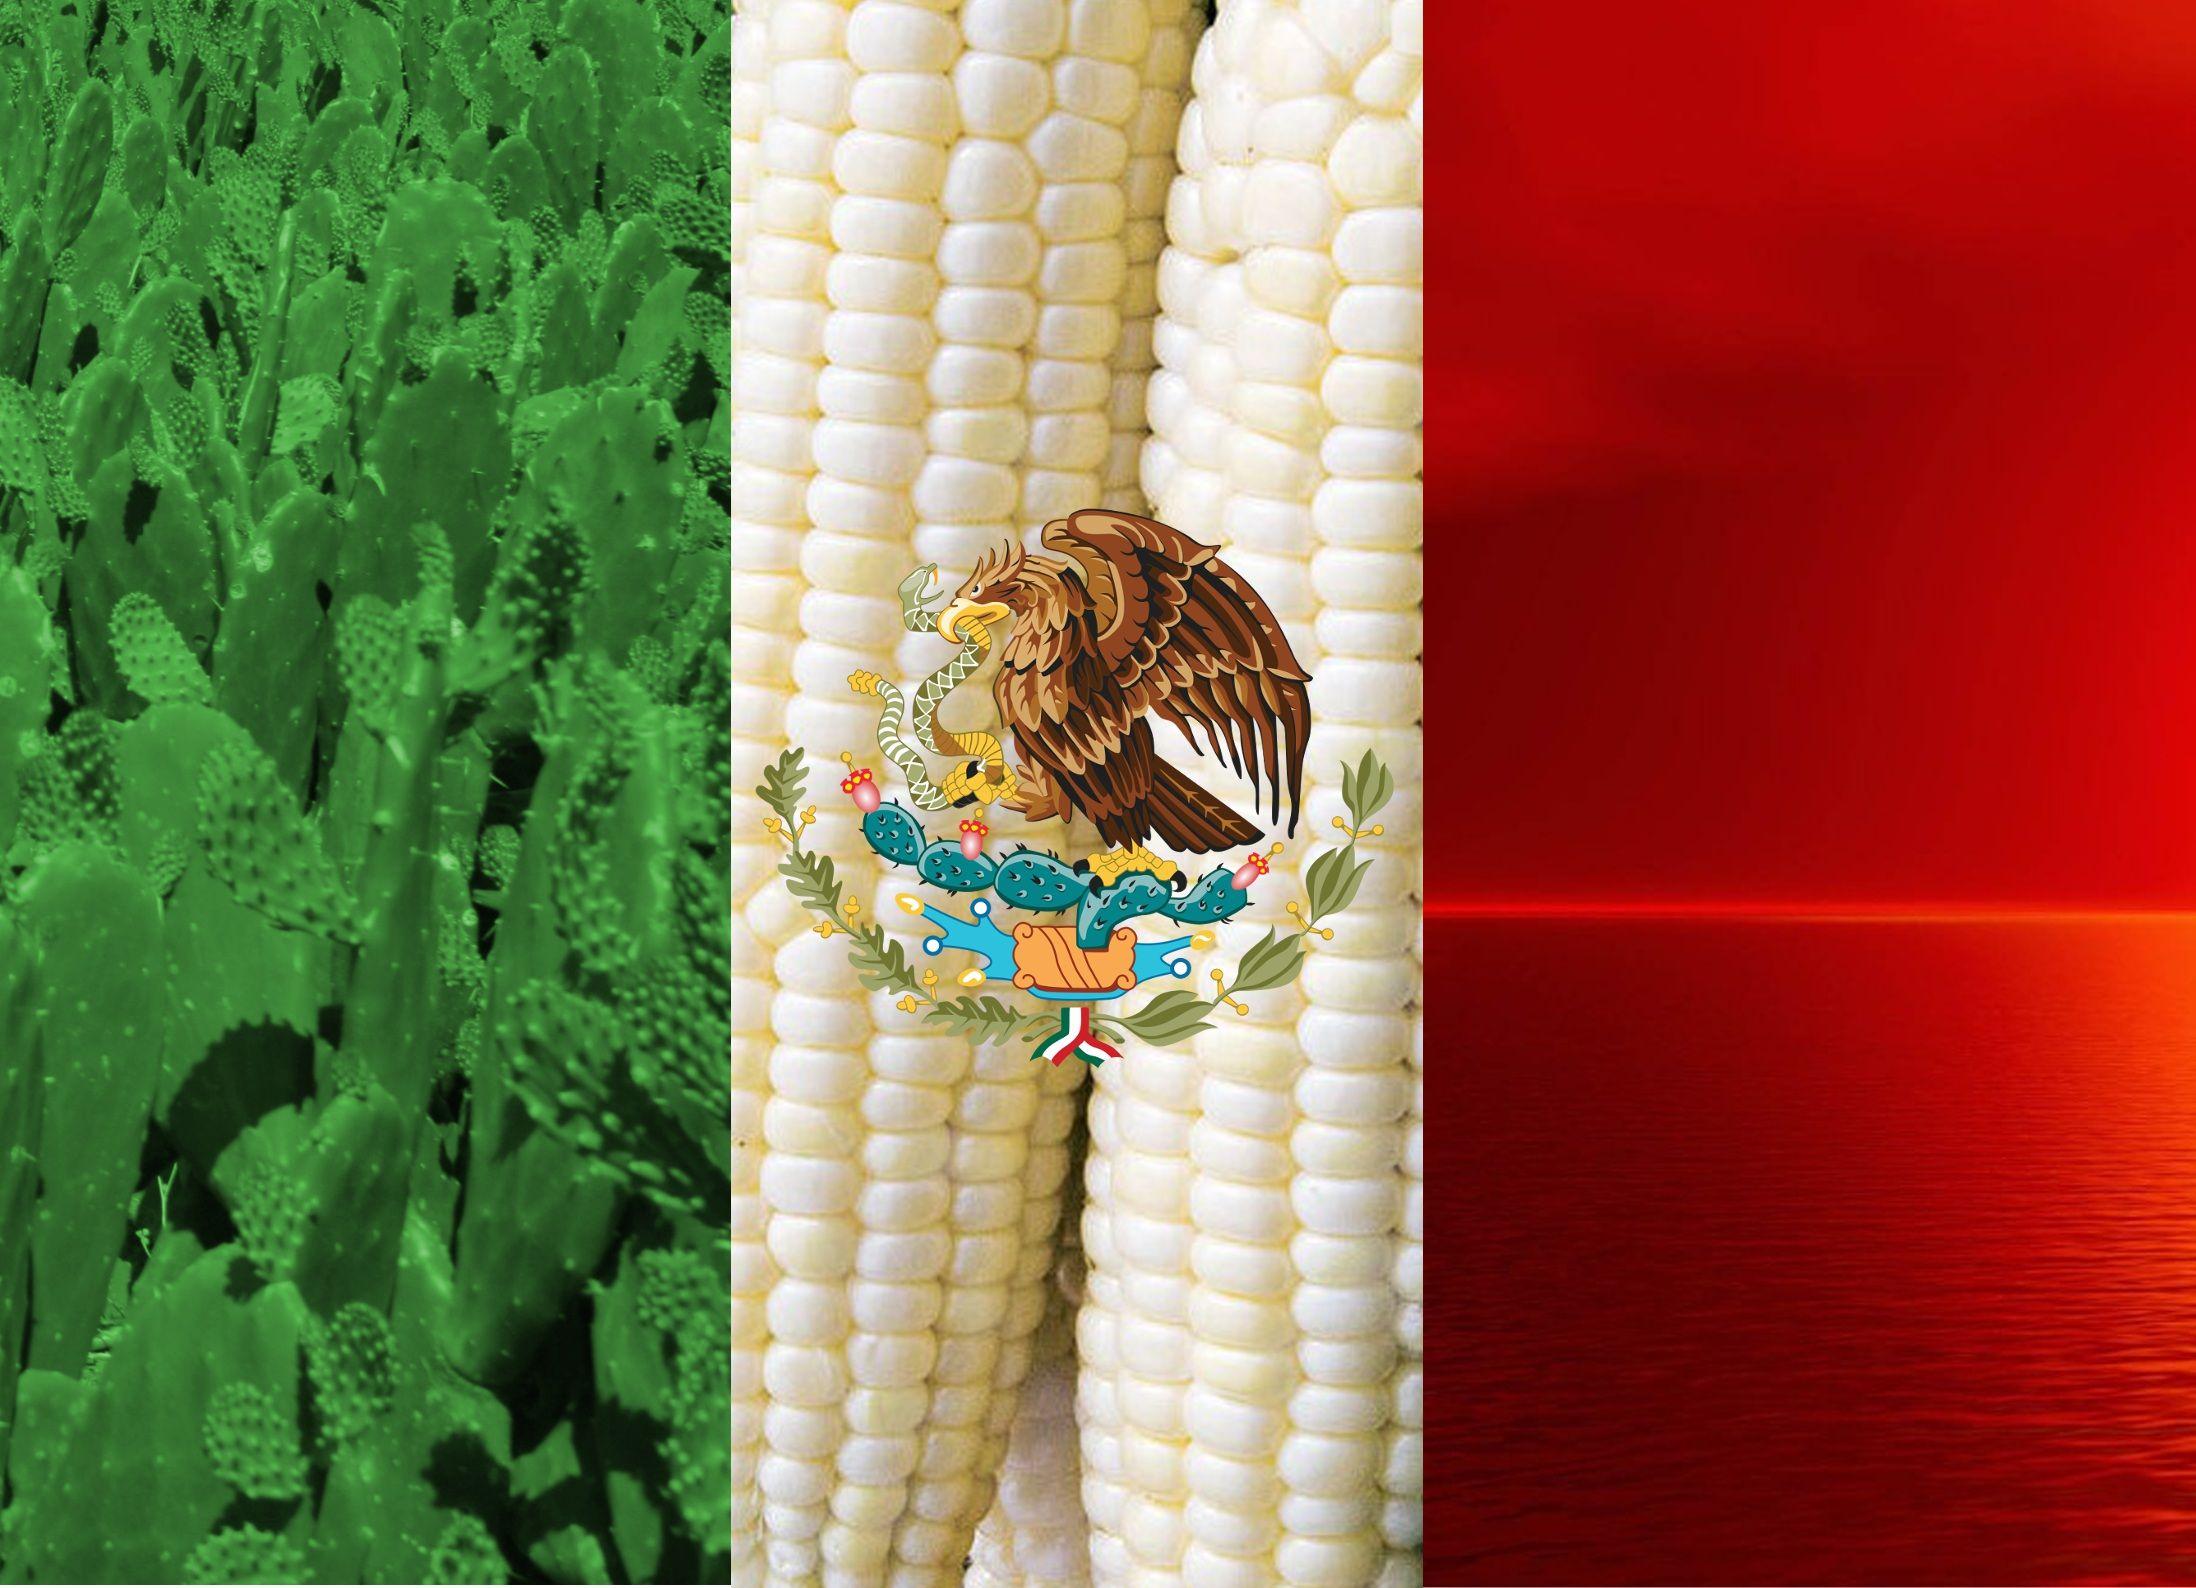 A flag of Mexico made out of corn - Mexico